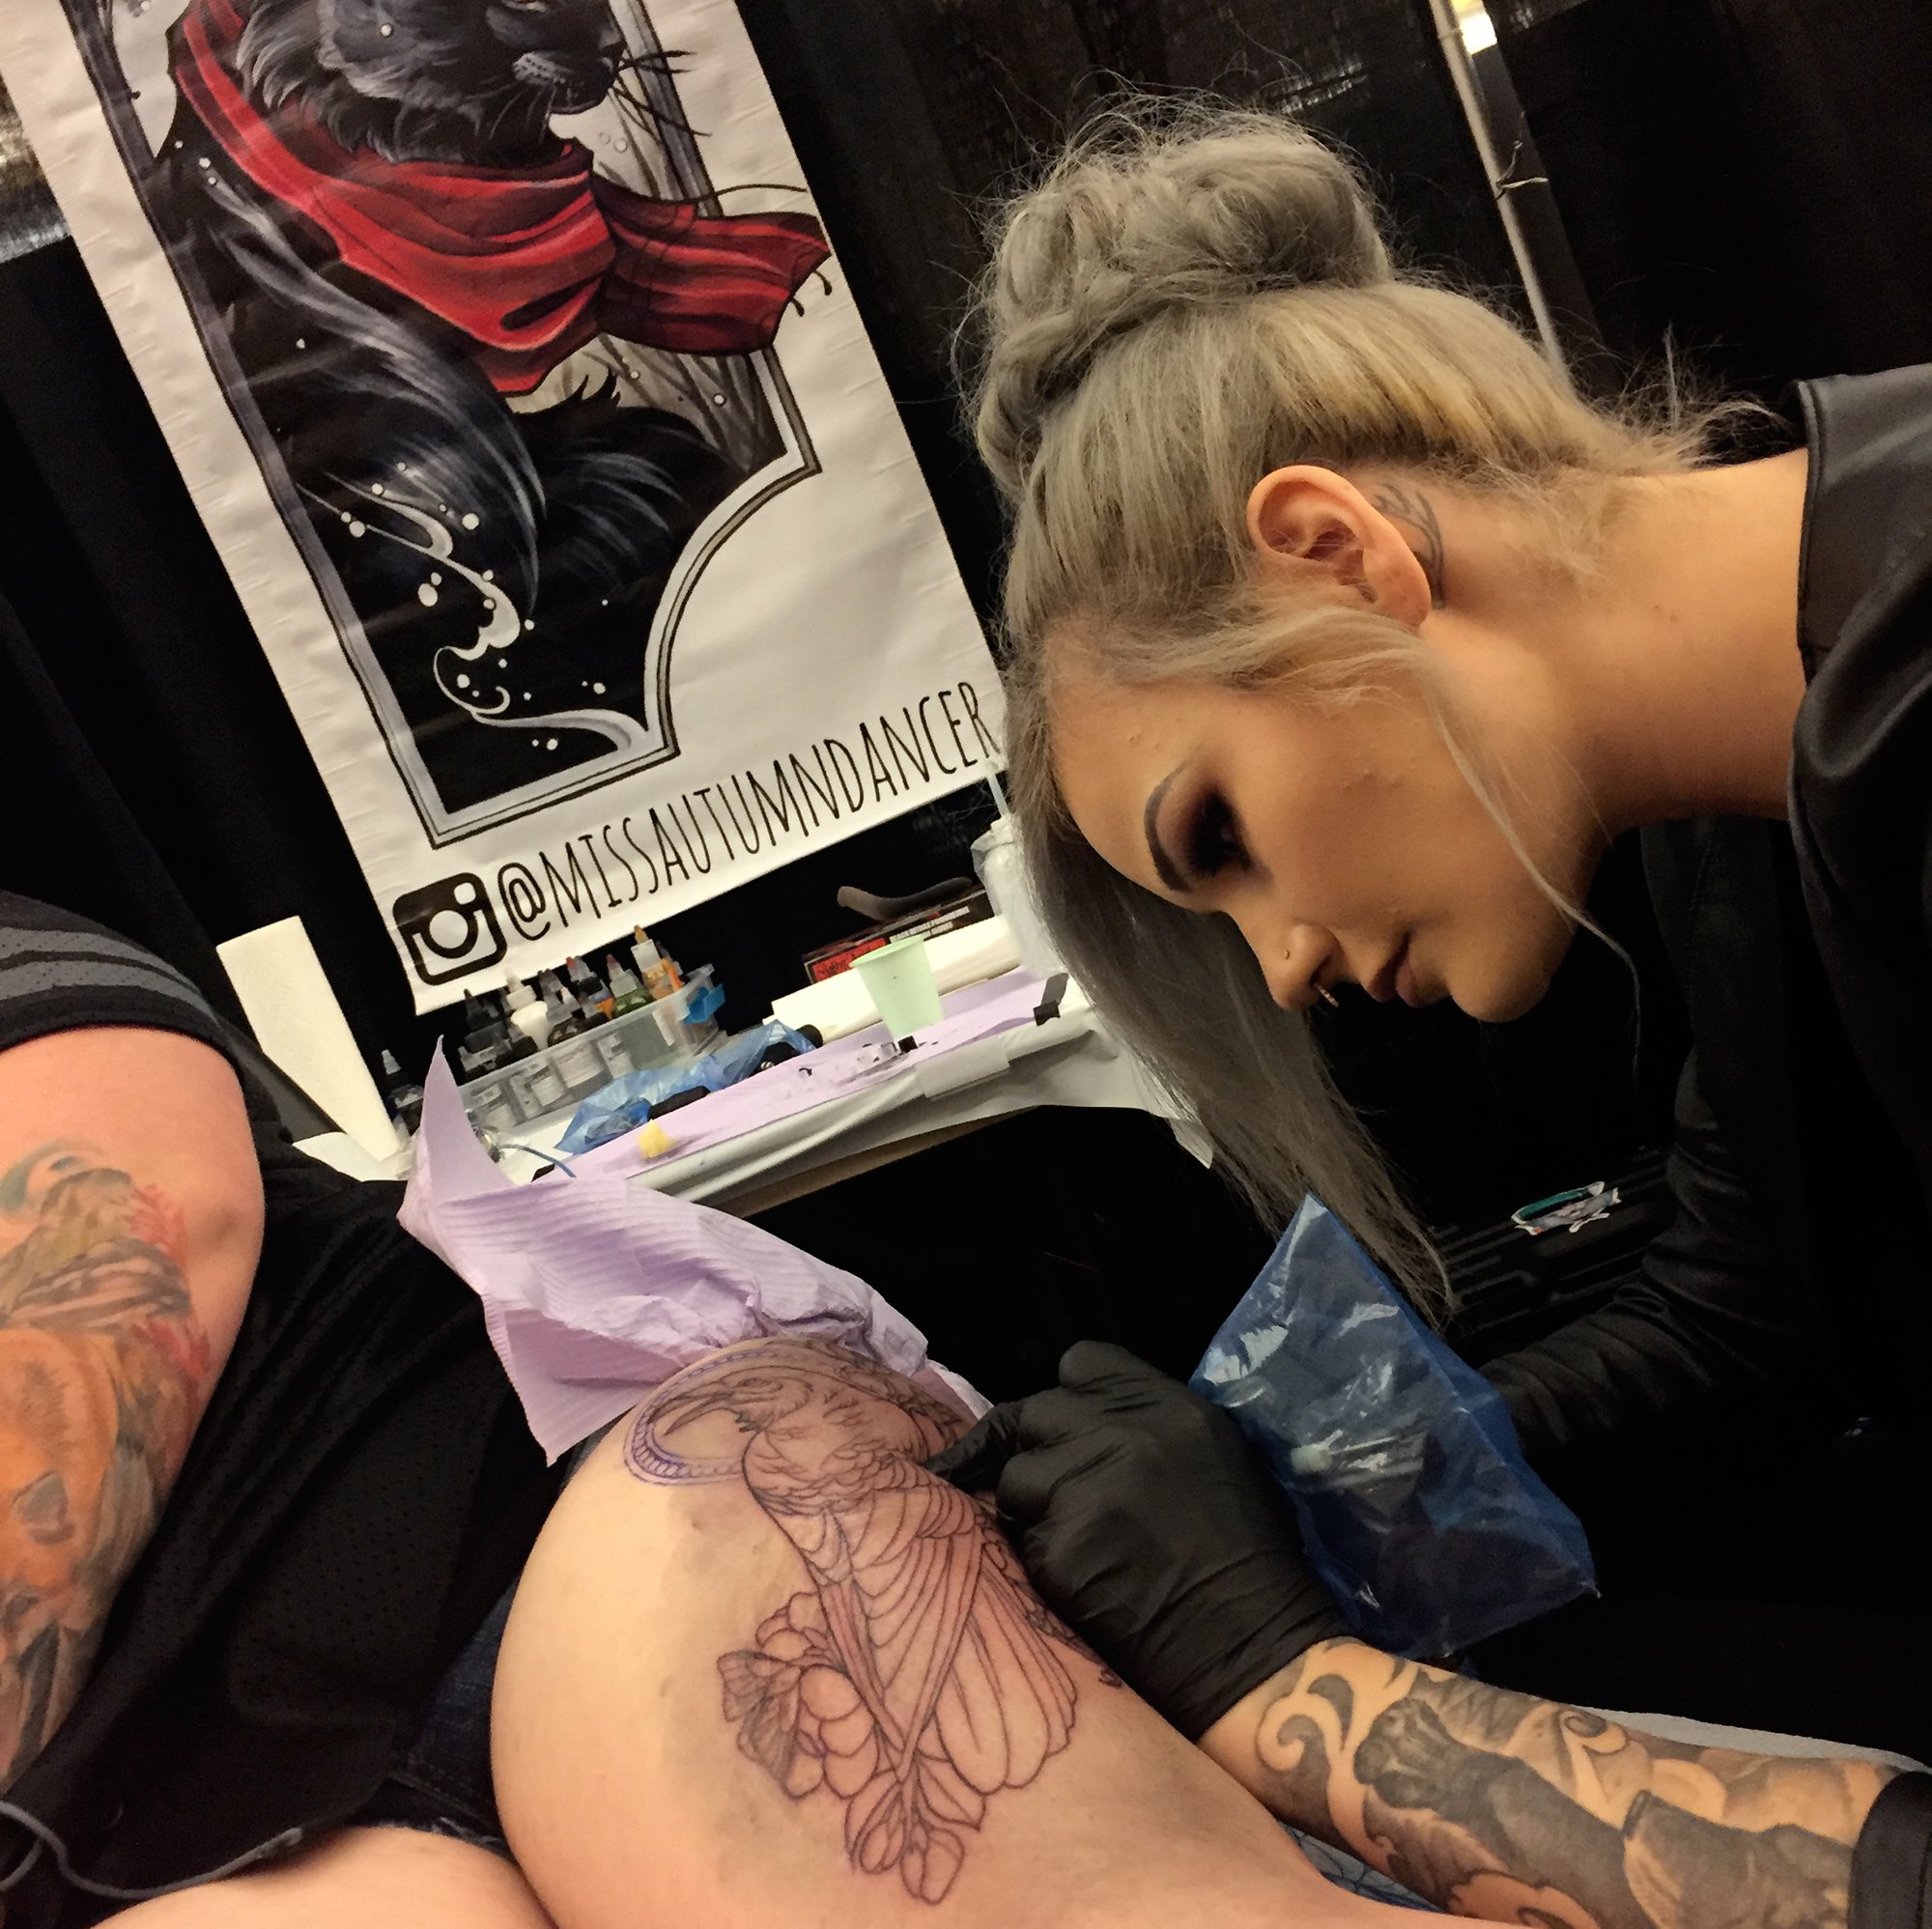 autumn dancer tattooing at the van isle tattoo expo, tattoo convention